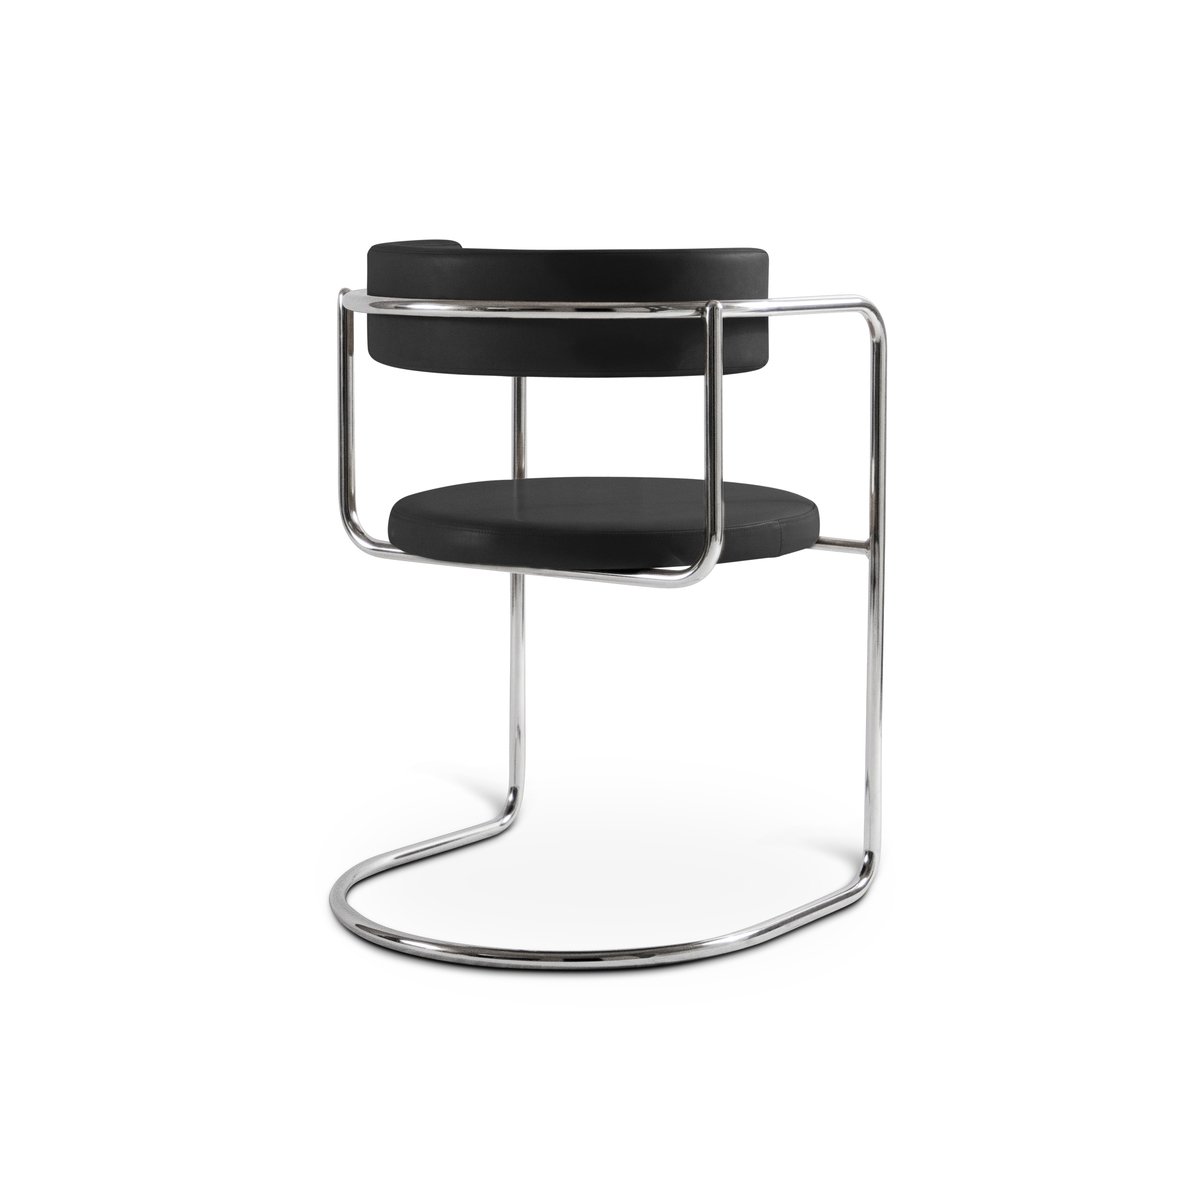 The FF Chair - Cantilever